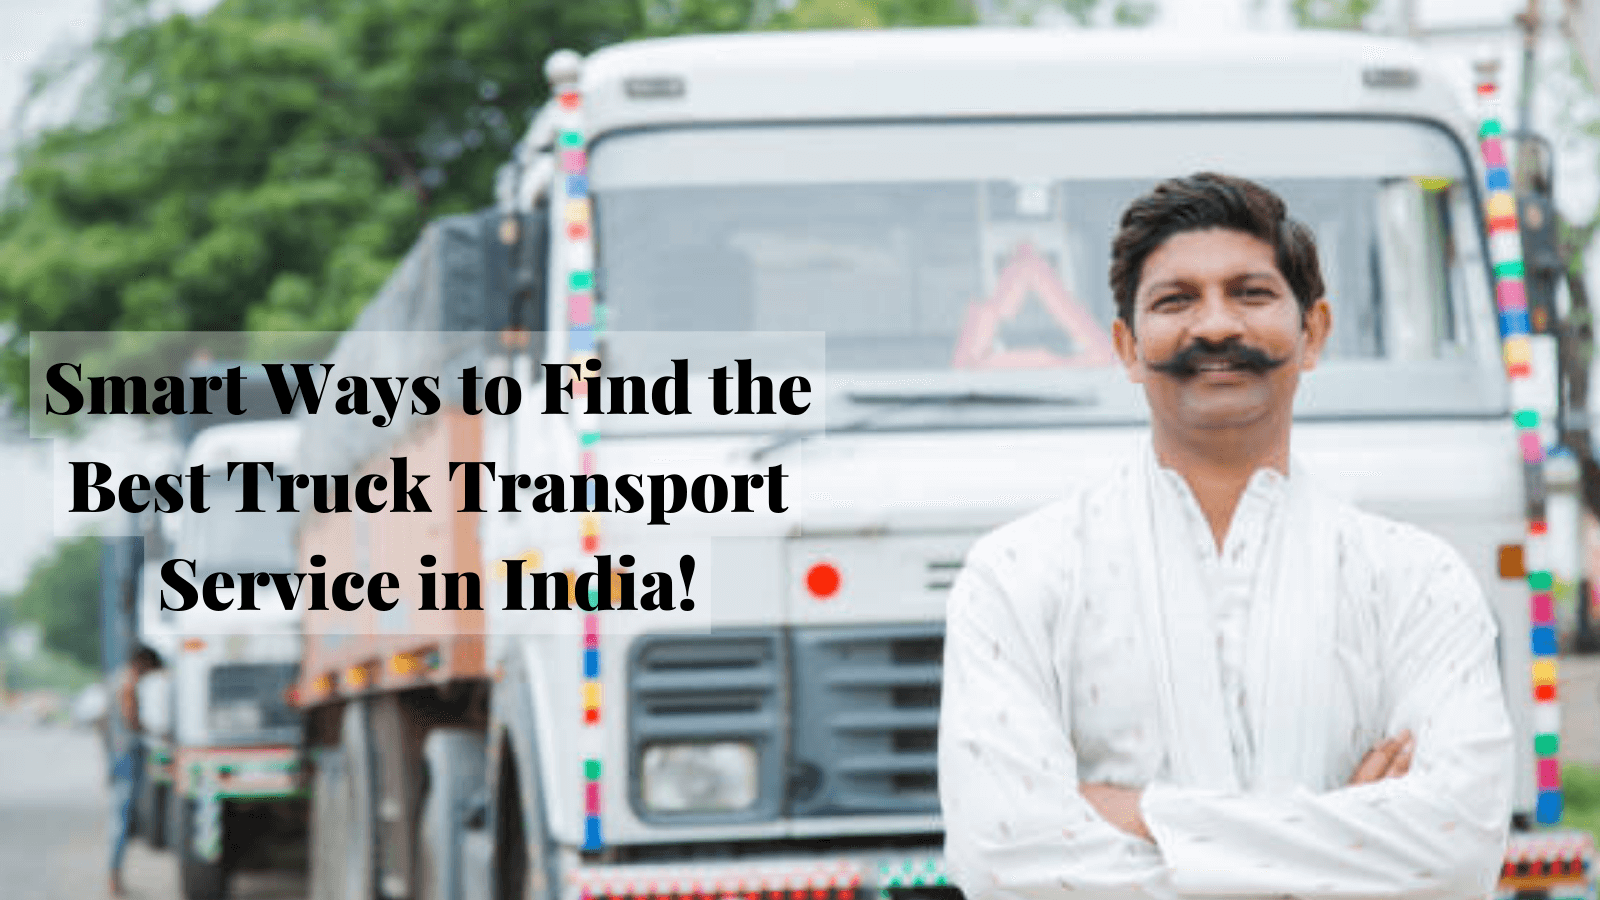 Smart Ways to Find the Best Truck Transport Service in India